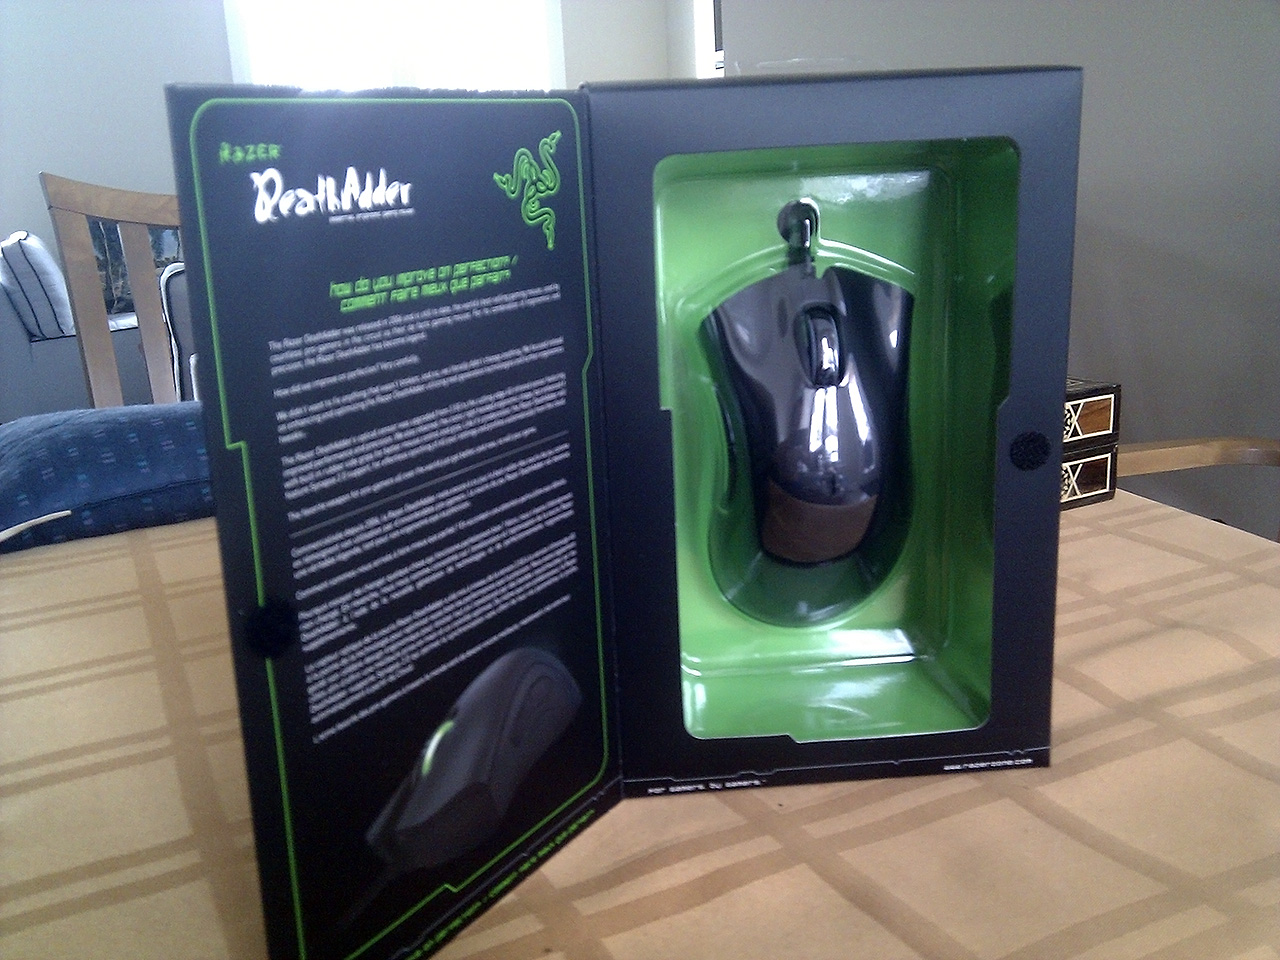 The DeathAdder unveiled.